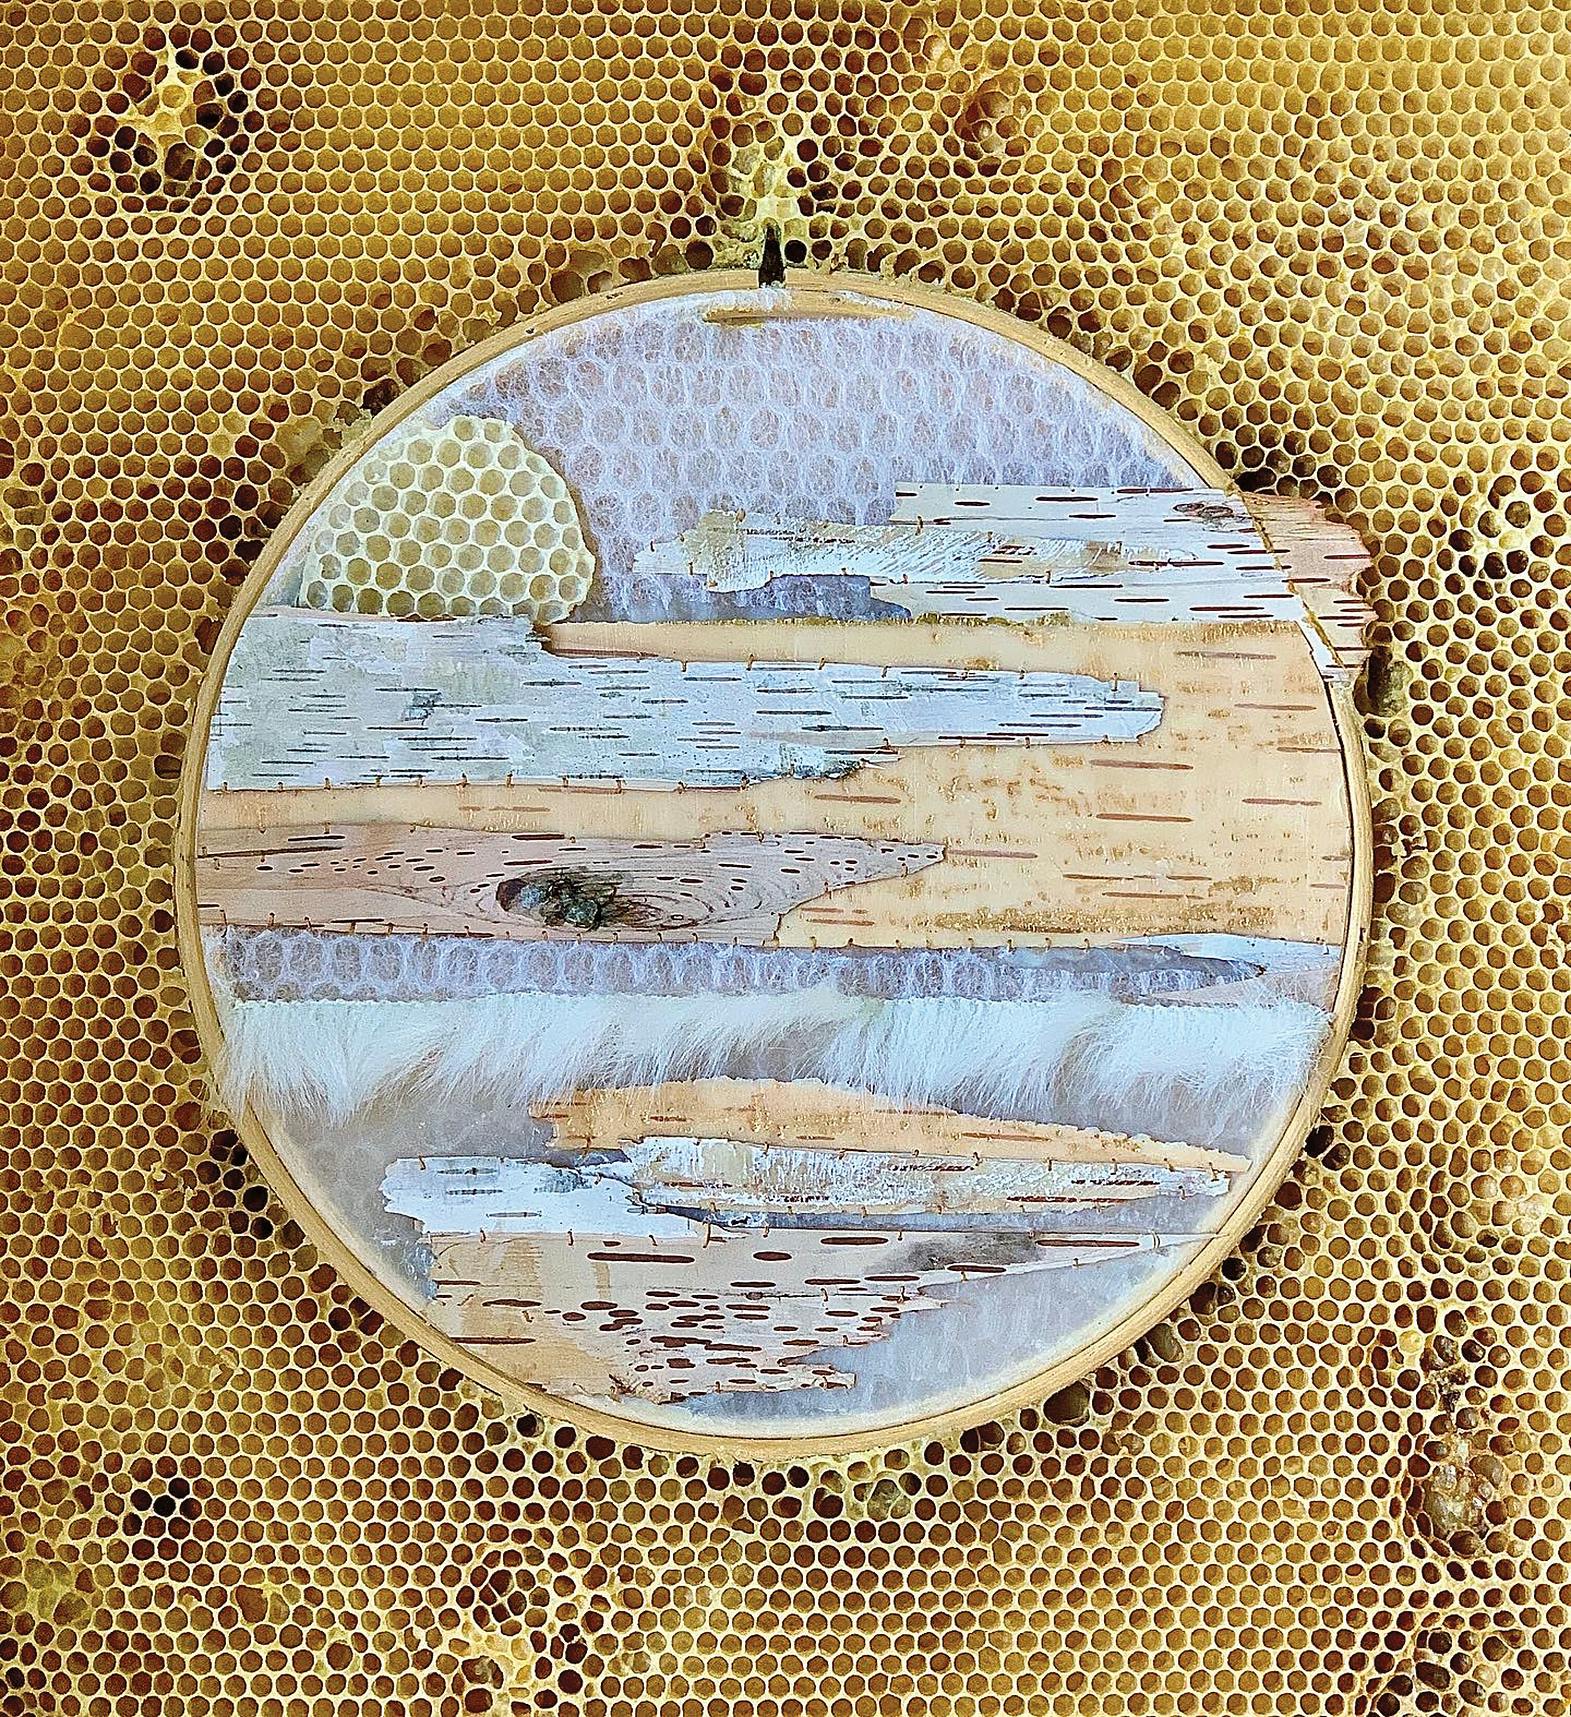 Embroidery hoop with blue fiber and beads embedded in honeycomb with bees